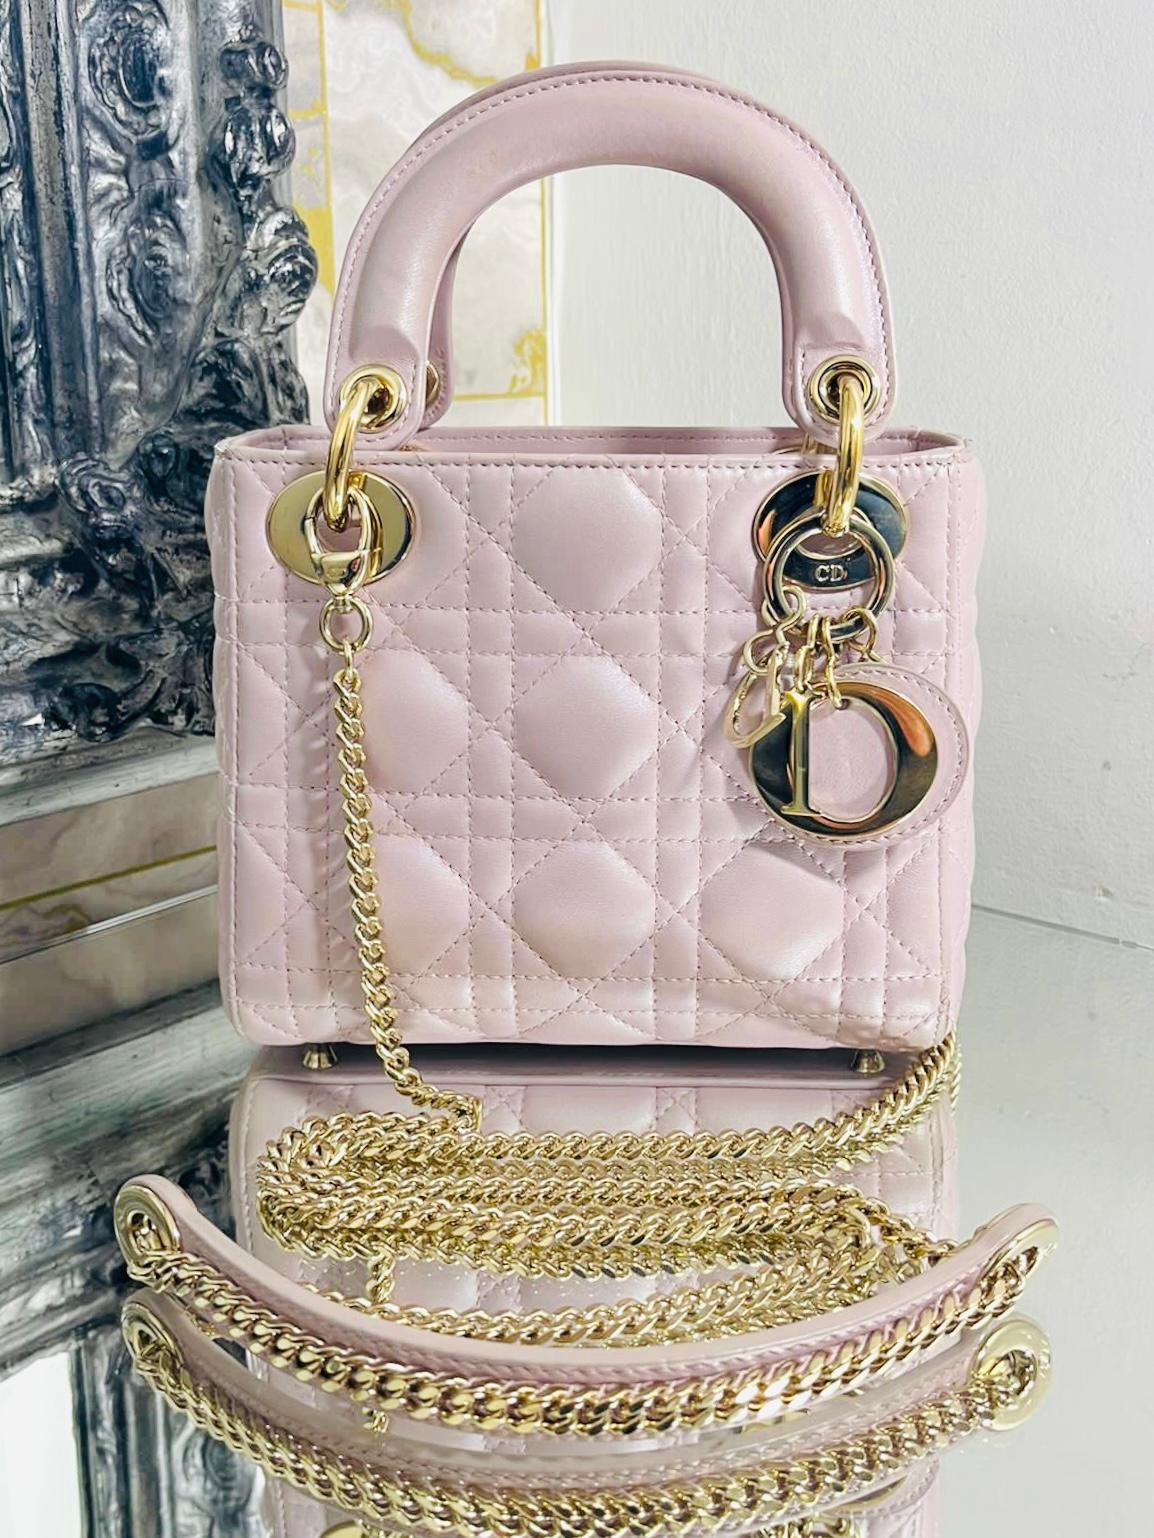  Dior Mini Lady Dior Leather Bag With Chain Strap 

Iridescent pink, Lambskin leather bag with Champagne gold hardware.

Signature cannage stitching,  D.I.O.R. dangle charm embellishment and a 

 removable chain shoulder strap, the  bag can be